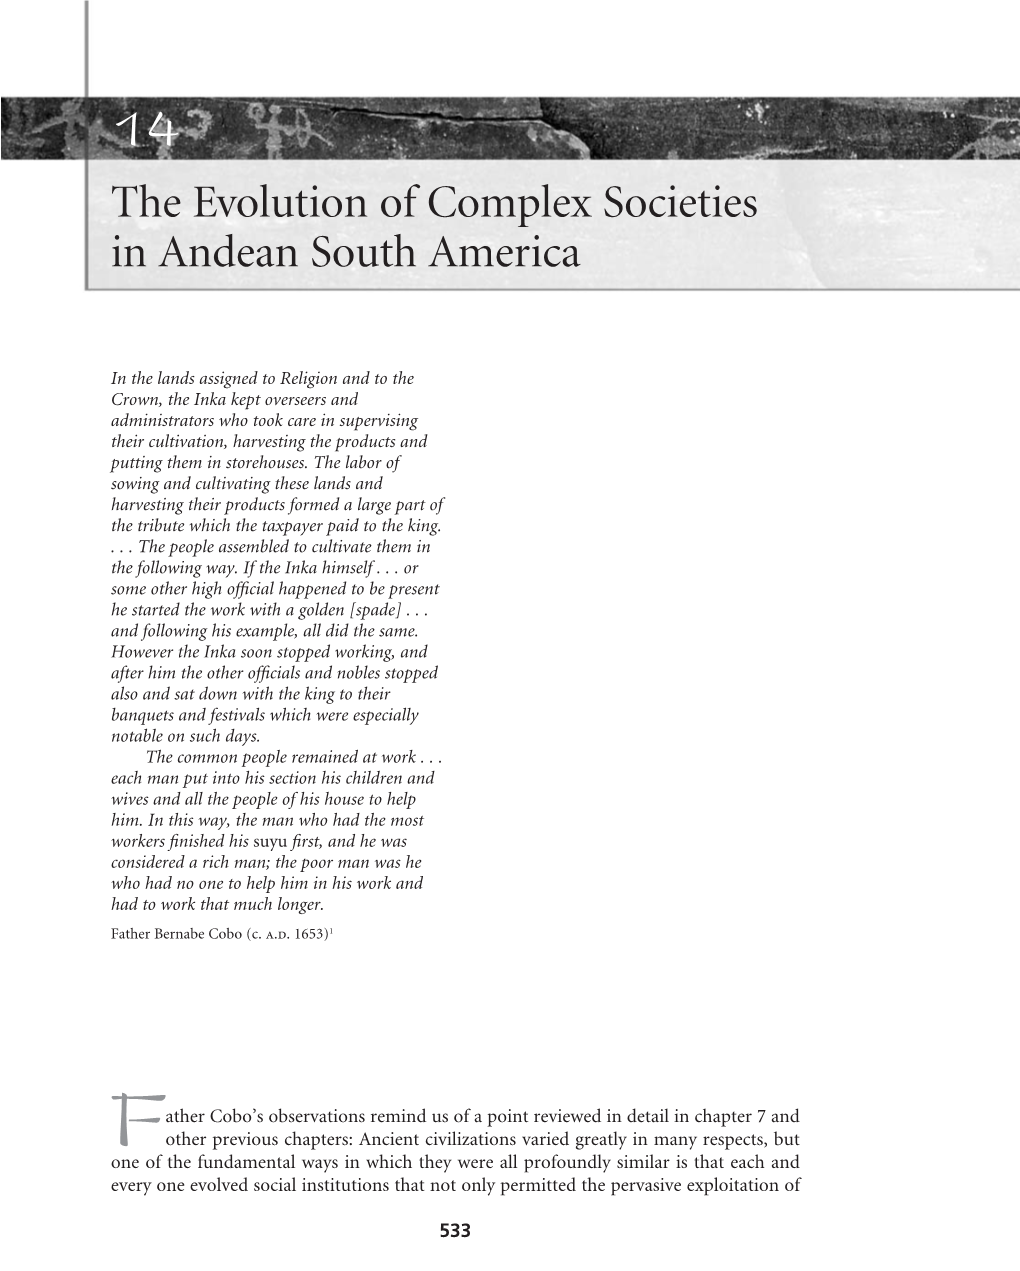 The Evolution of Complex Societies in Andean South America